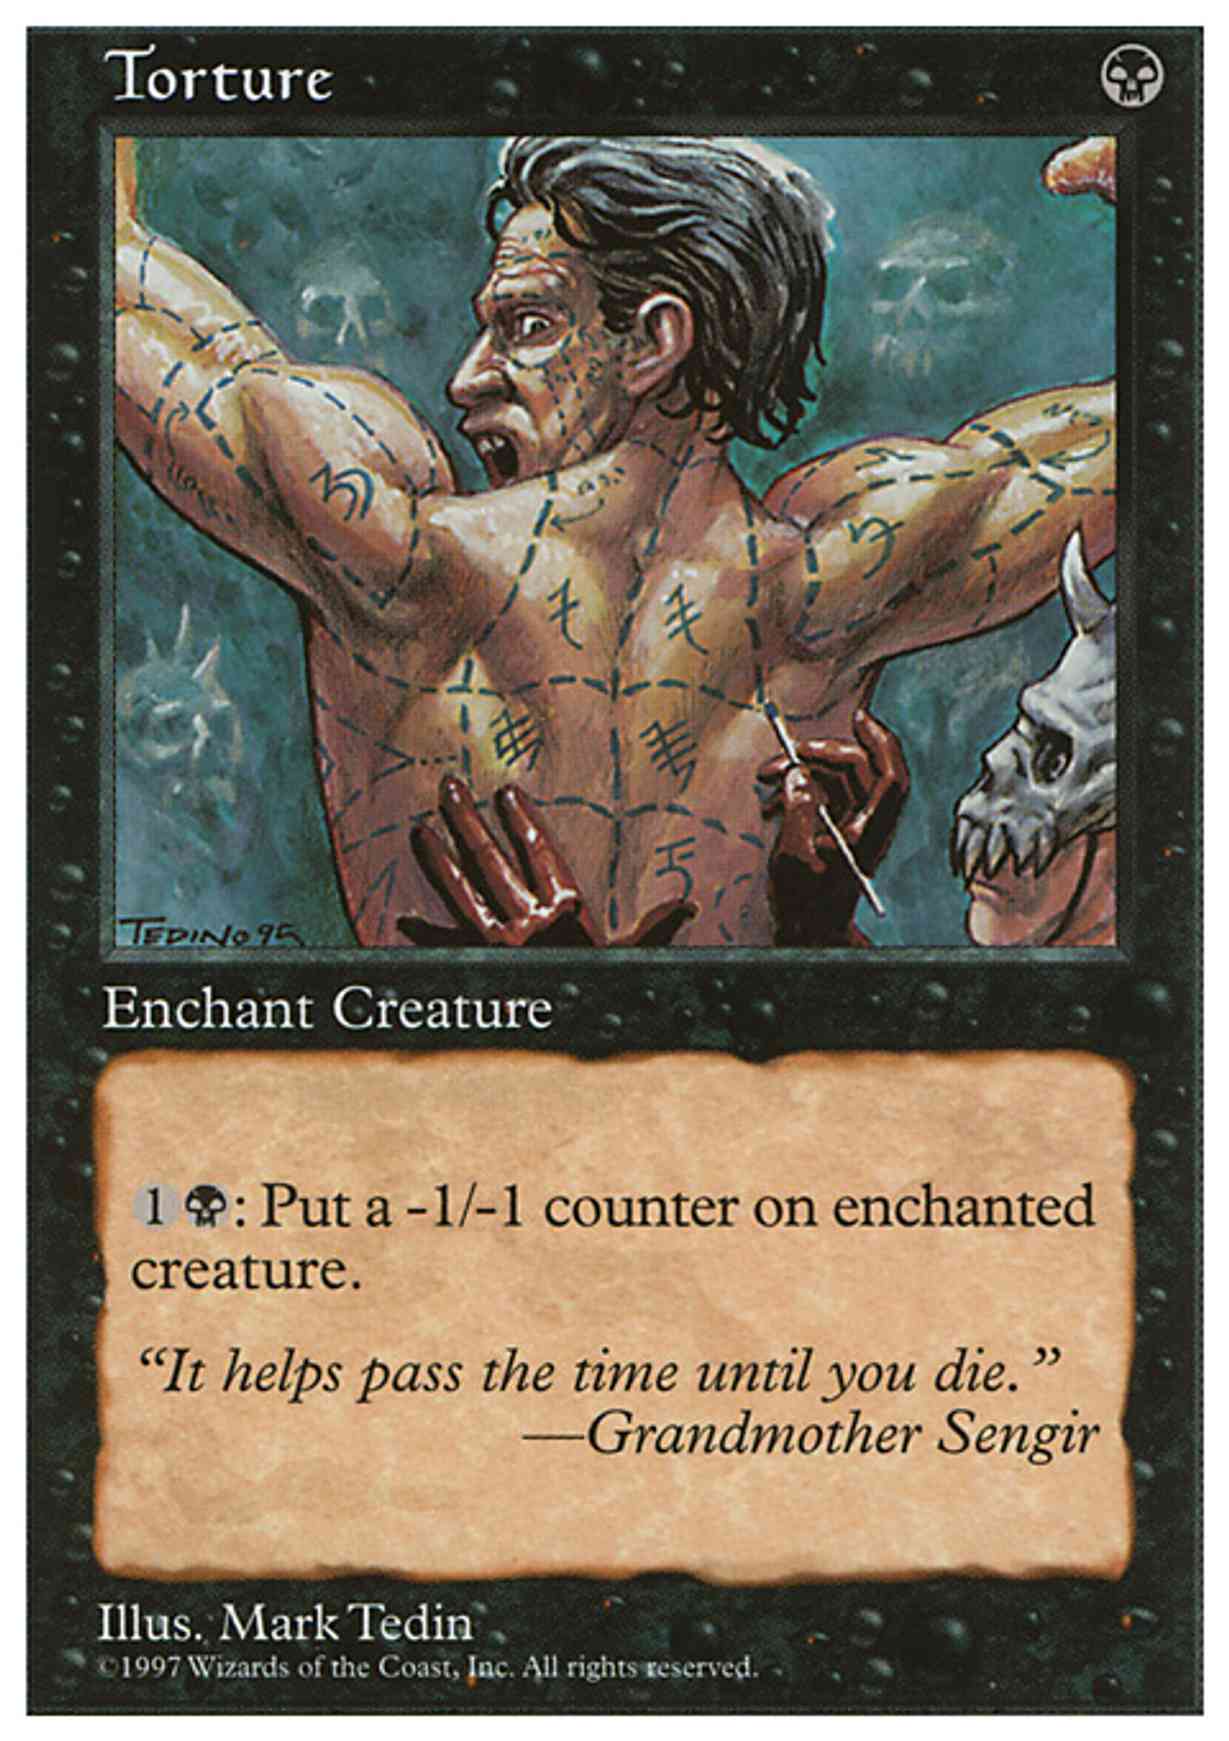 Torture magic card front